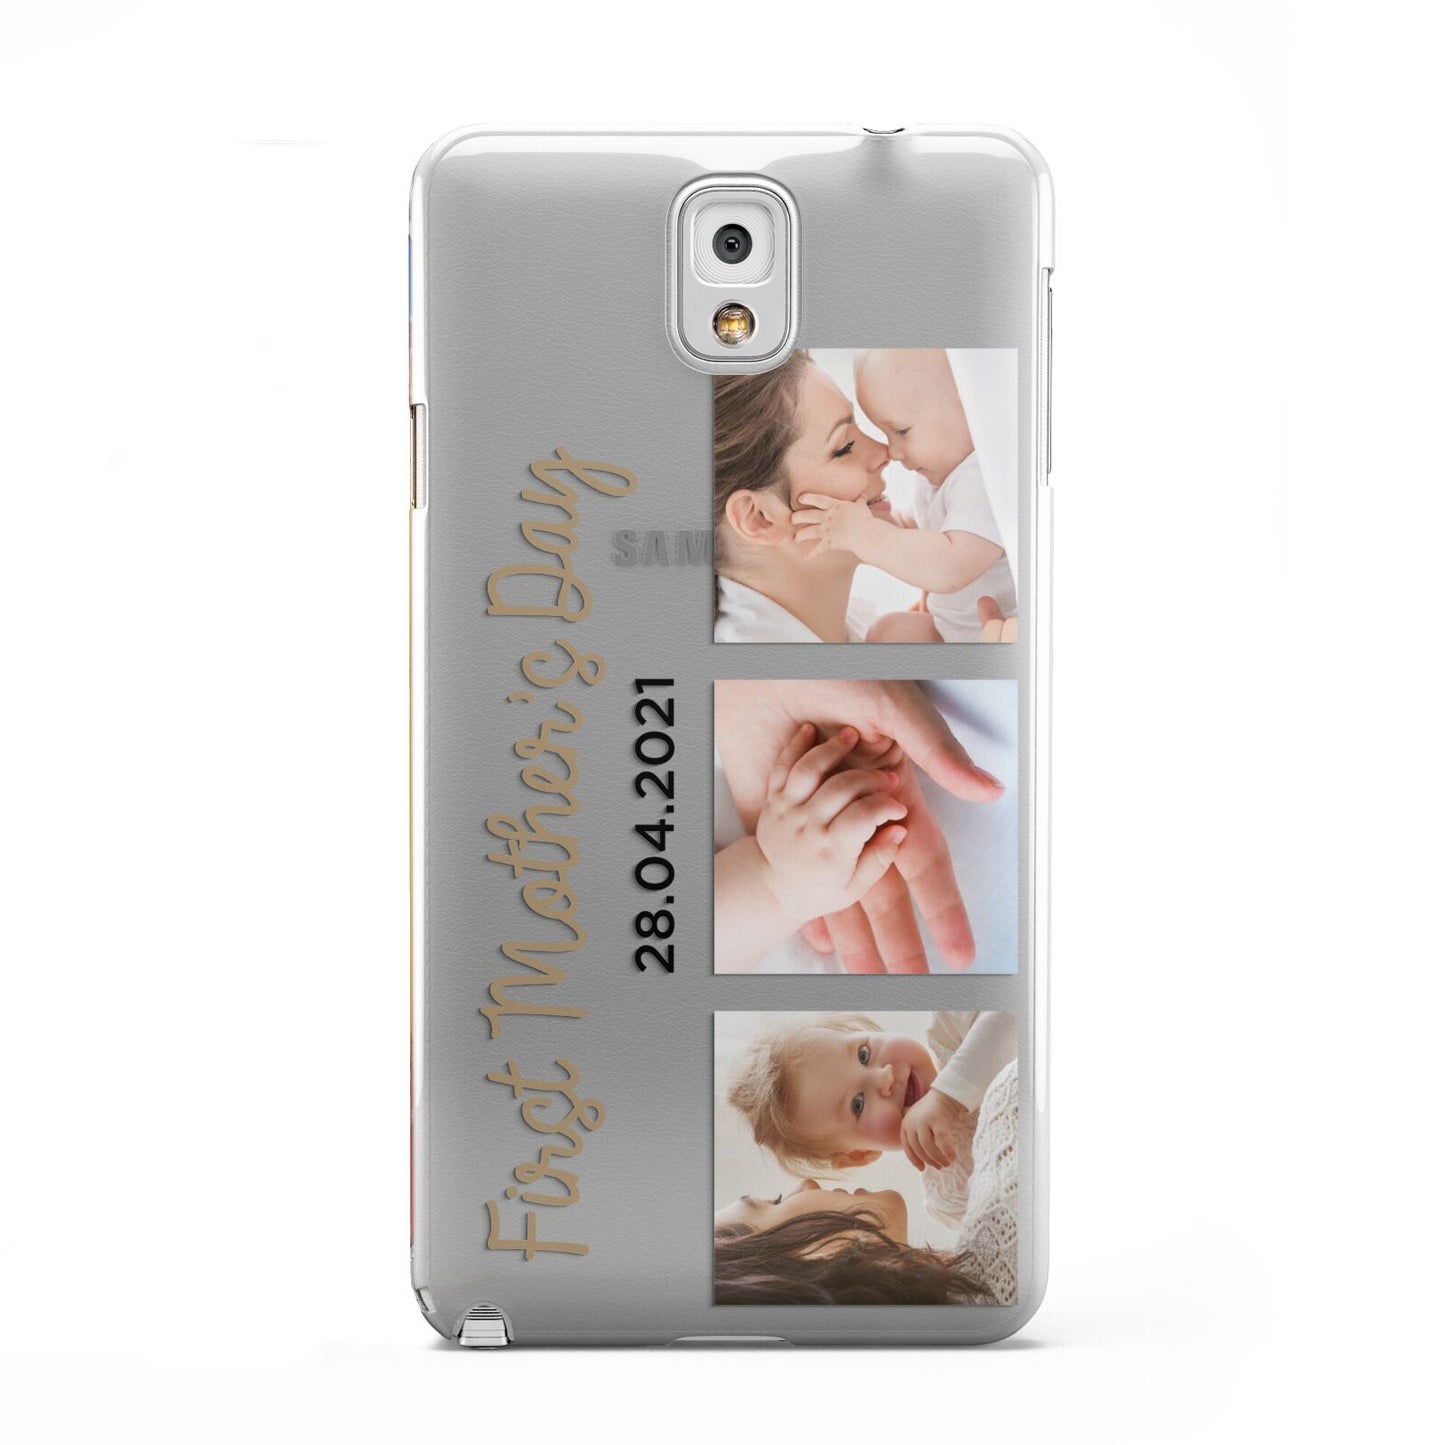 First Mothers Day Photo Samsung Galaxy Note 3 Case